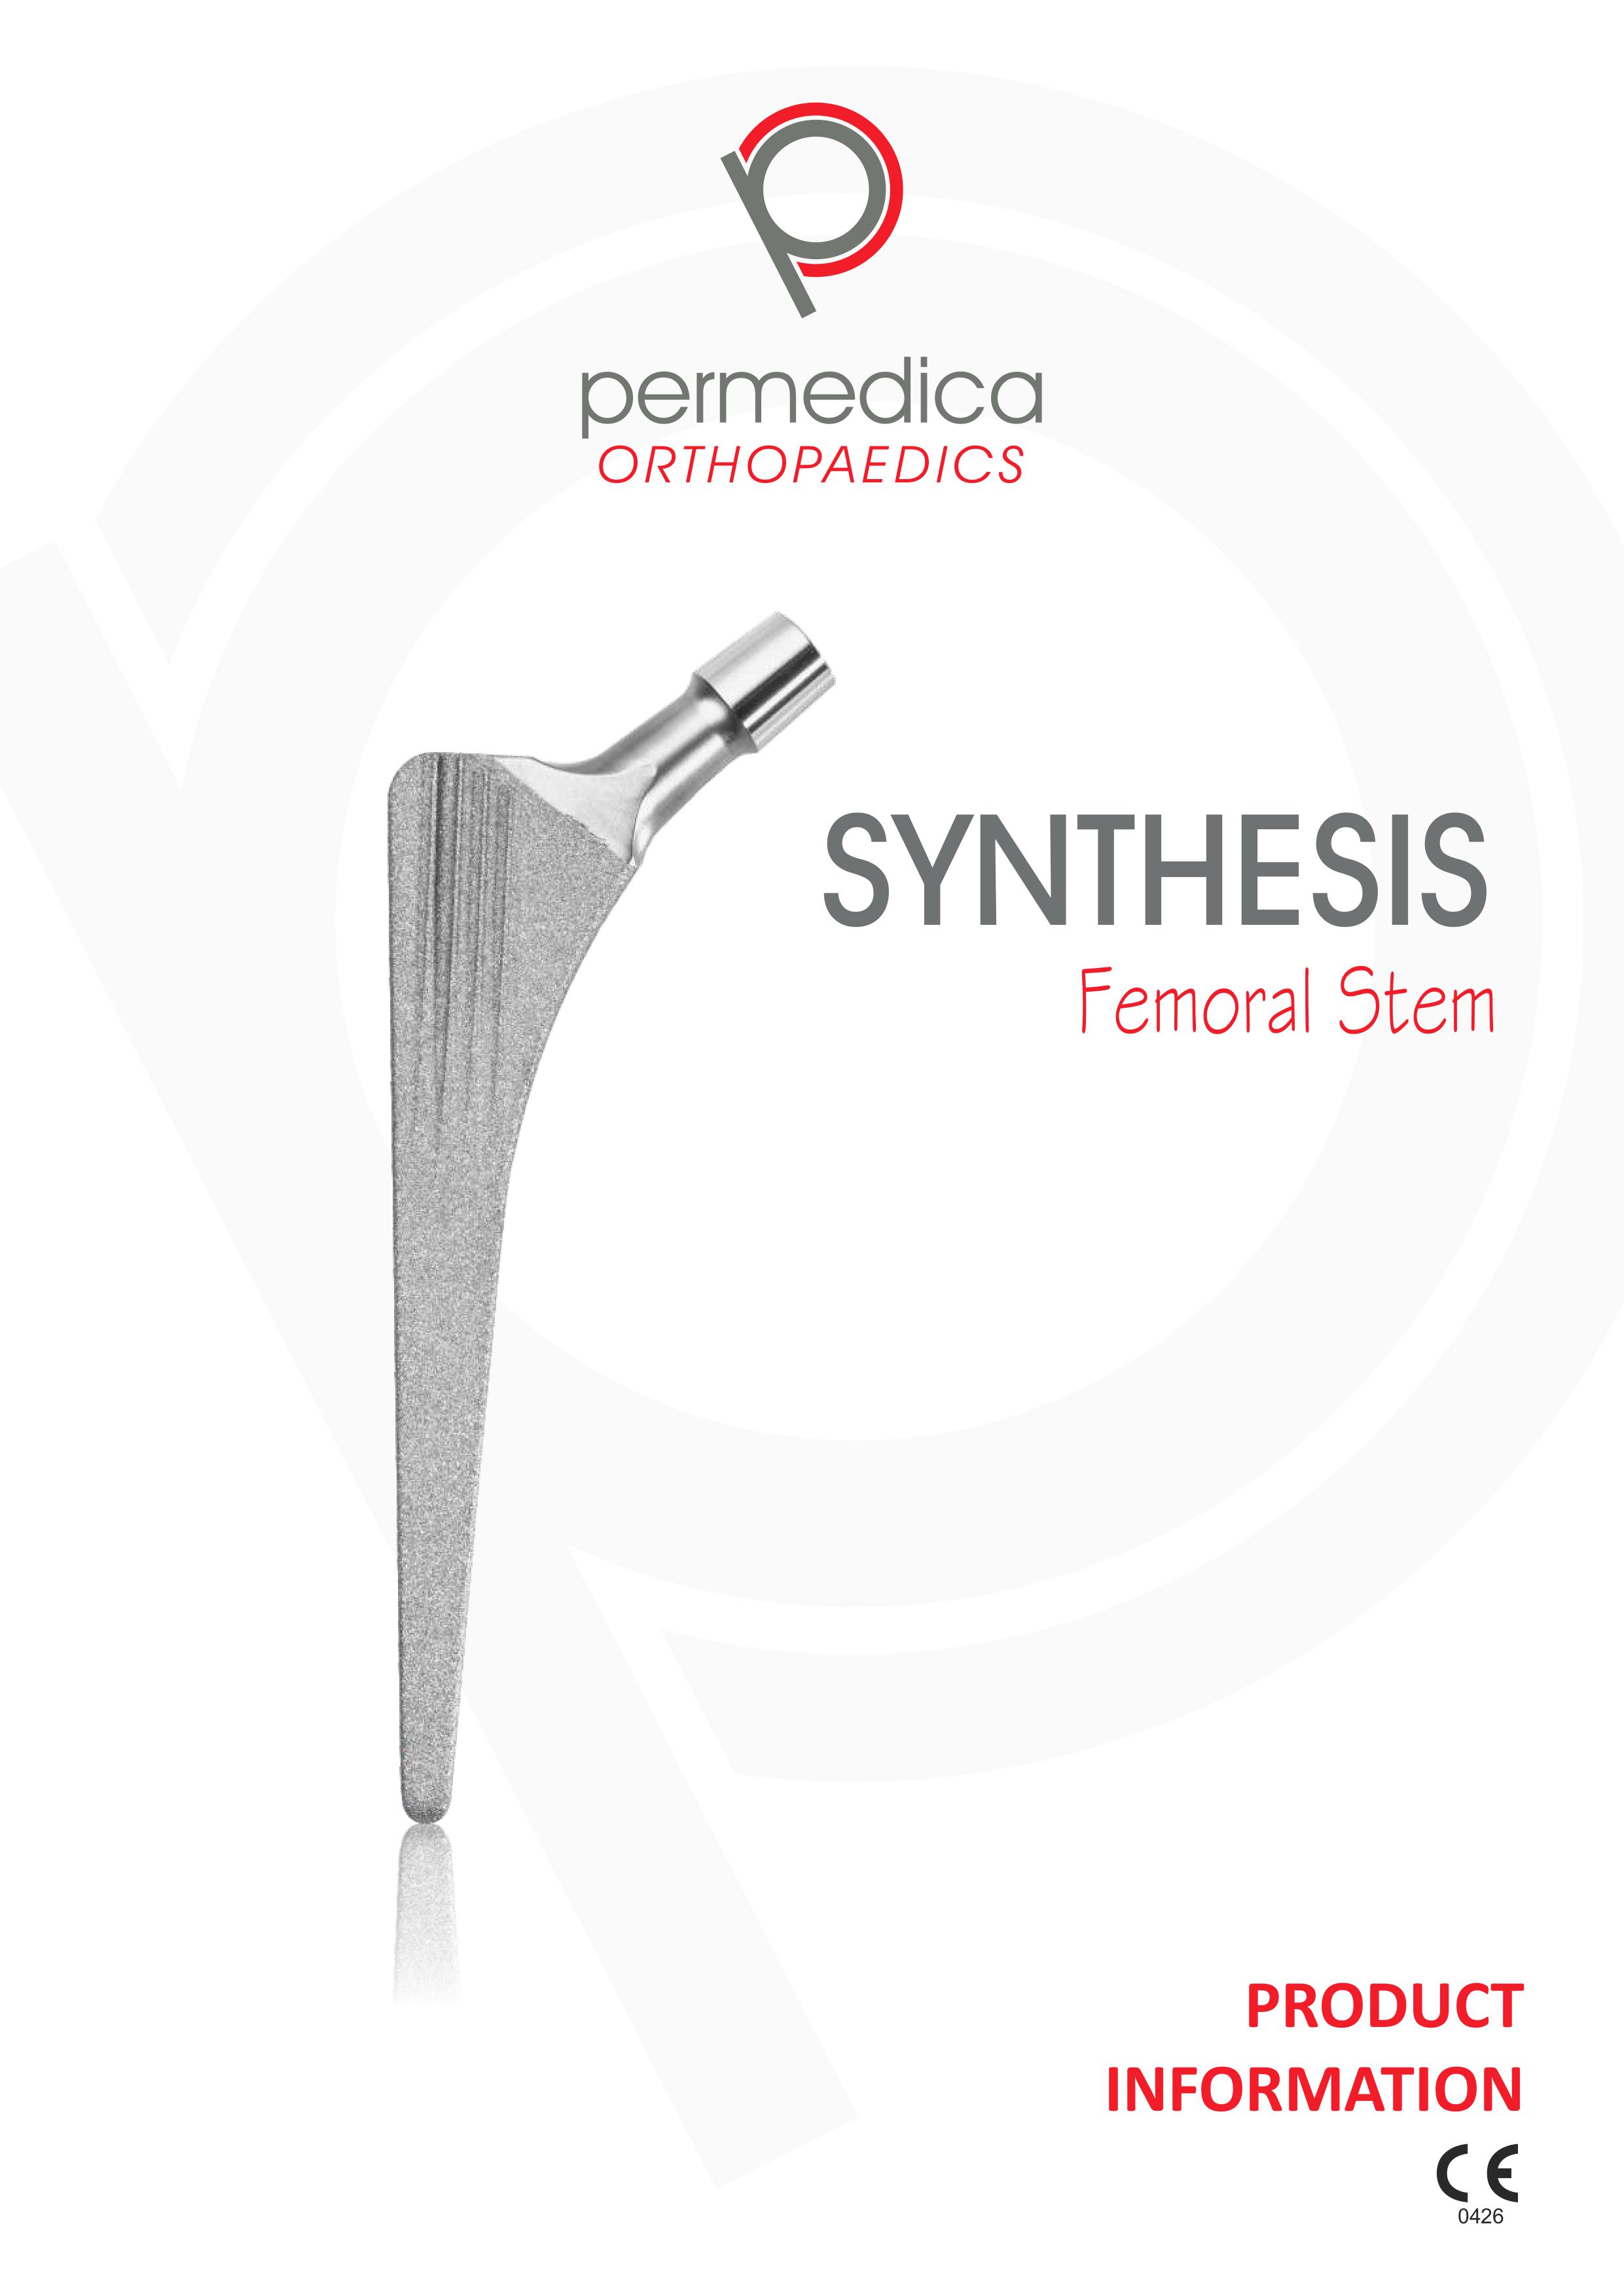 SYNTHESIS Femoral Stem